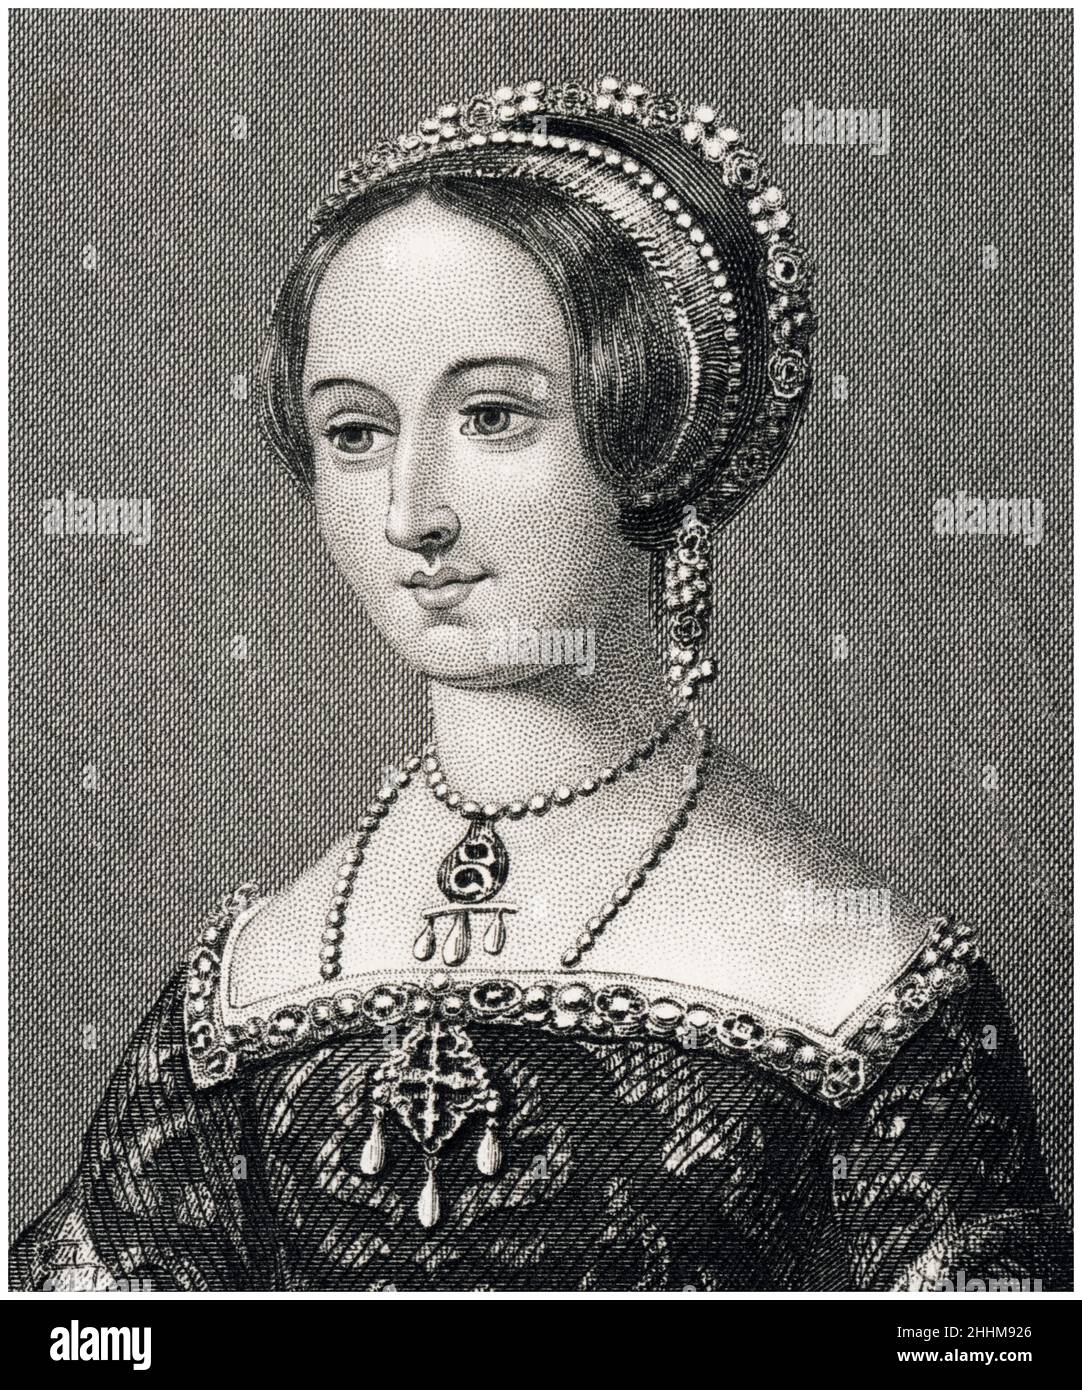 1864 Engraving High Resolution Stock Photography and Images - Alamy